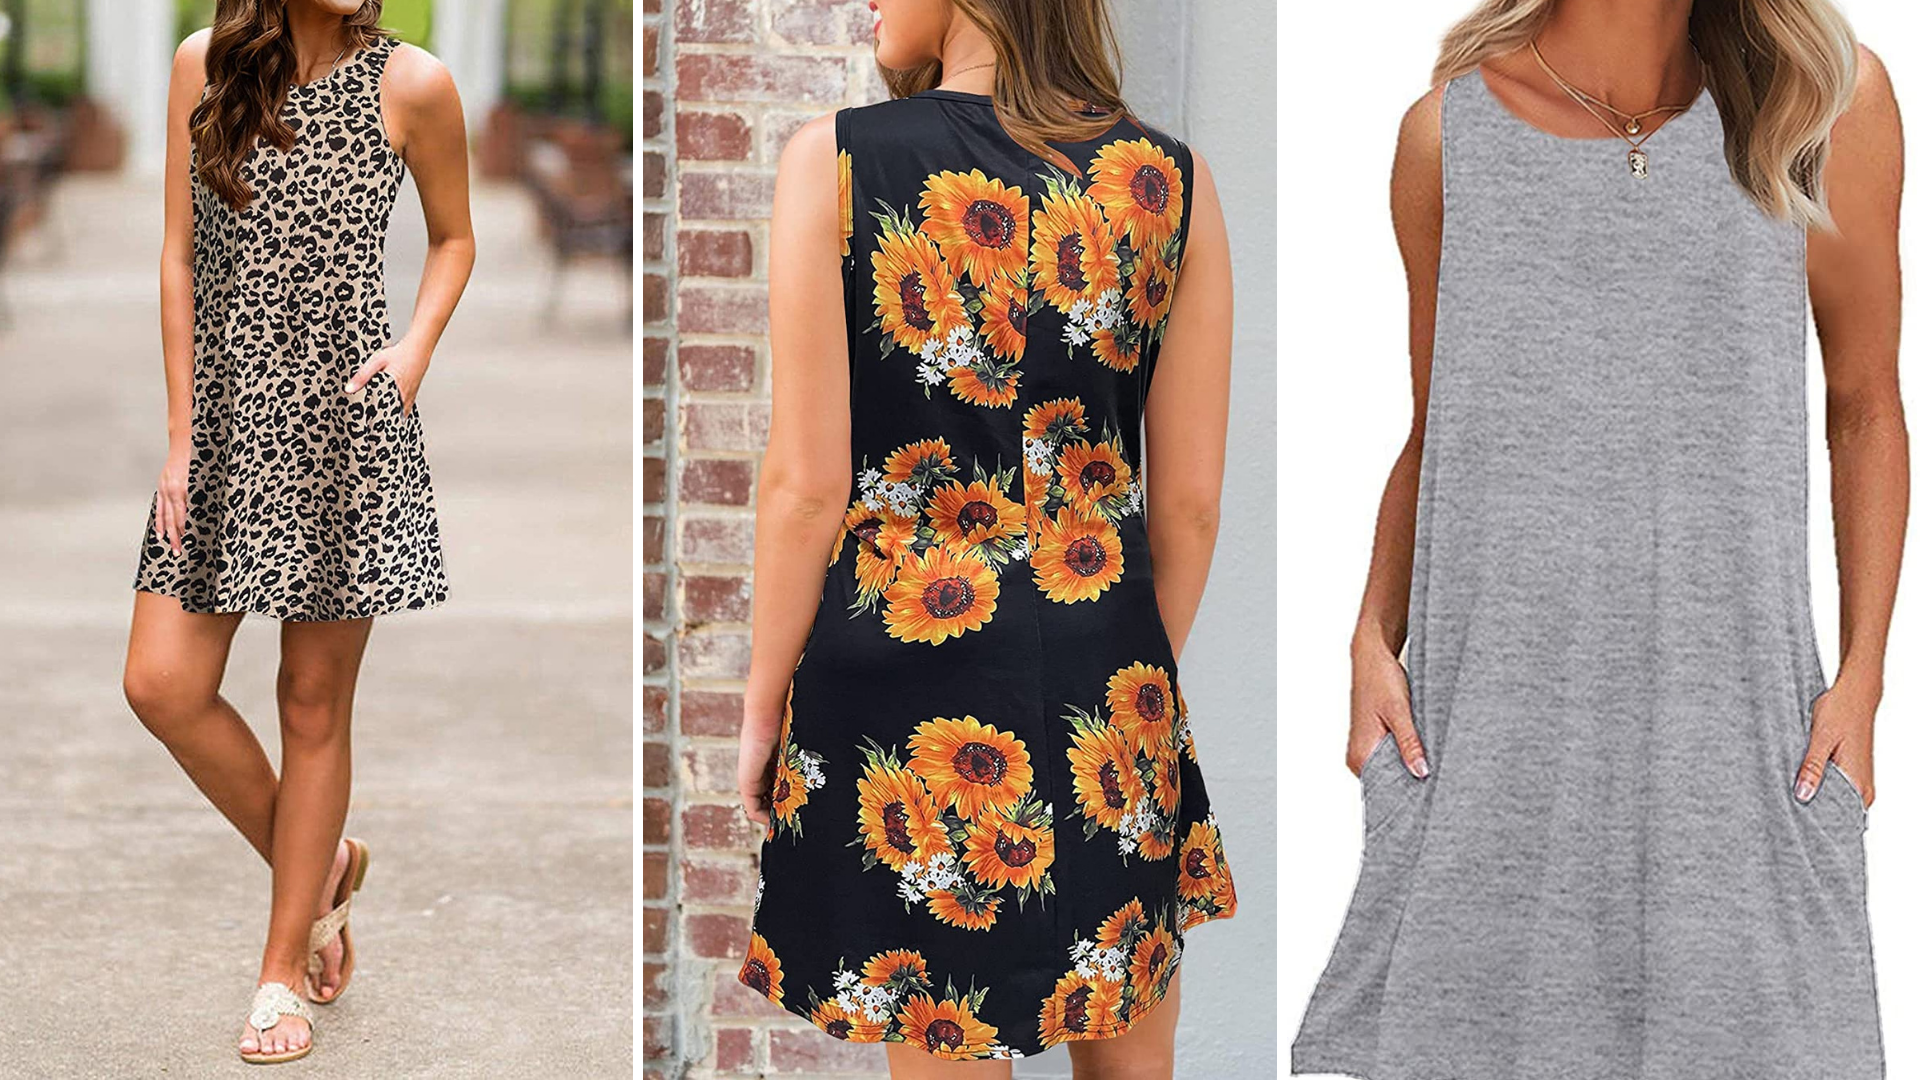 $29 dress on Amazon comes in 26 colors, patterns